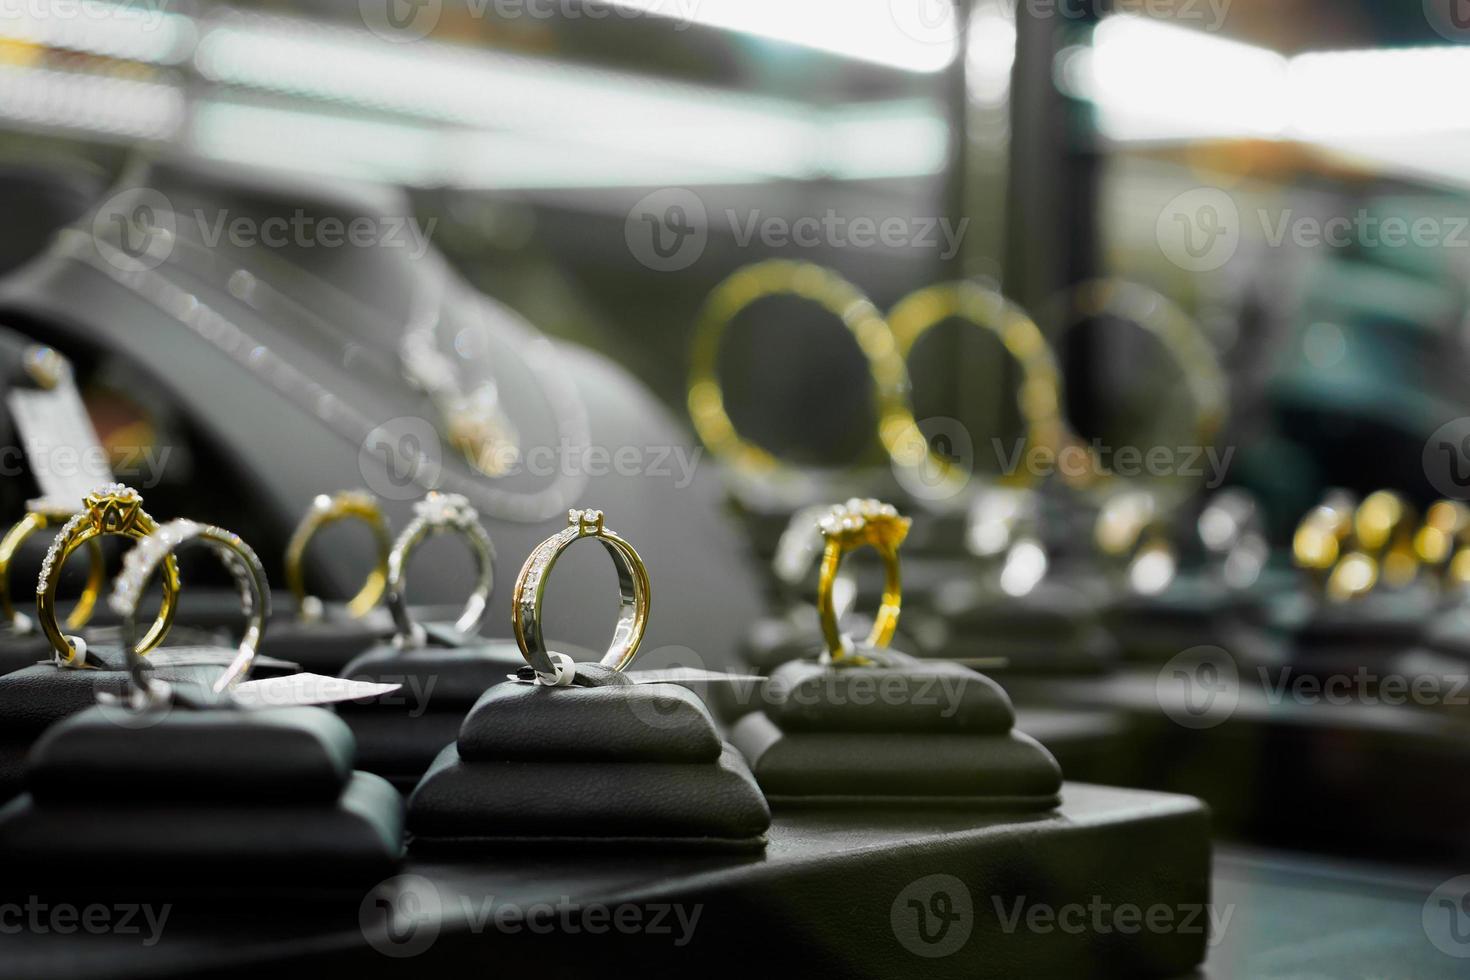 Jewelry diamond rings and necklaces show in luxury retail store window display photo